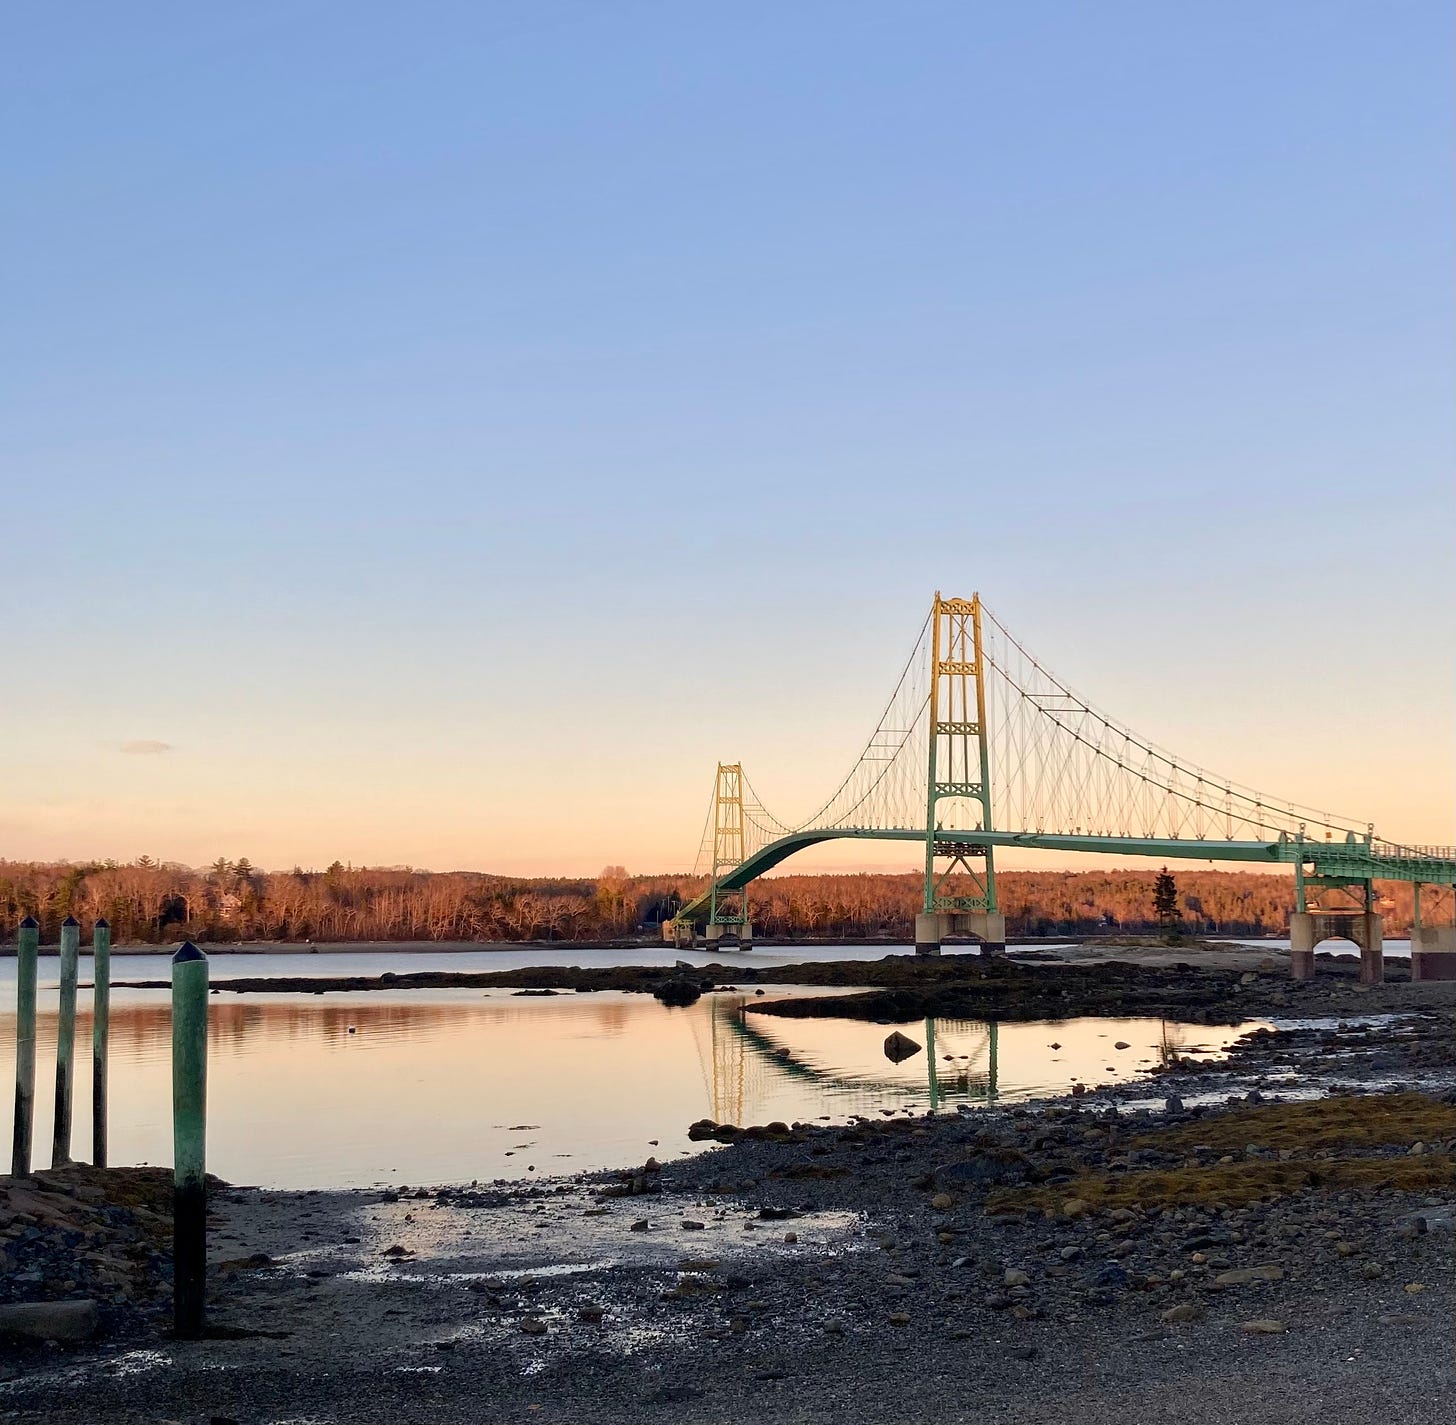 A green suspension bridge spans the Eggemoggin Reach. It is sunset and the top of the bridge is gold with setting sun.